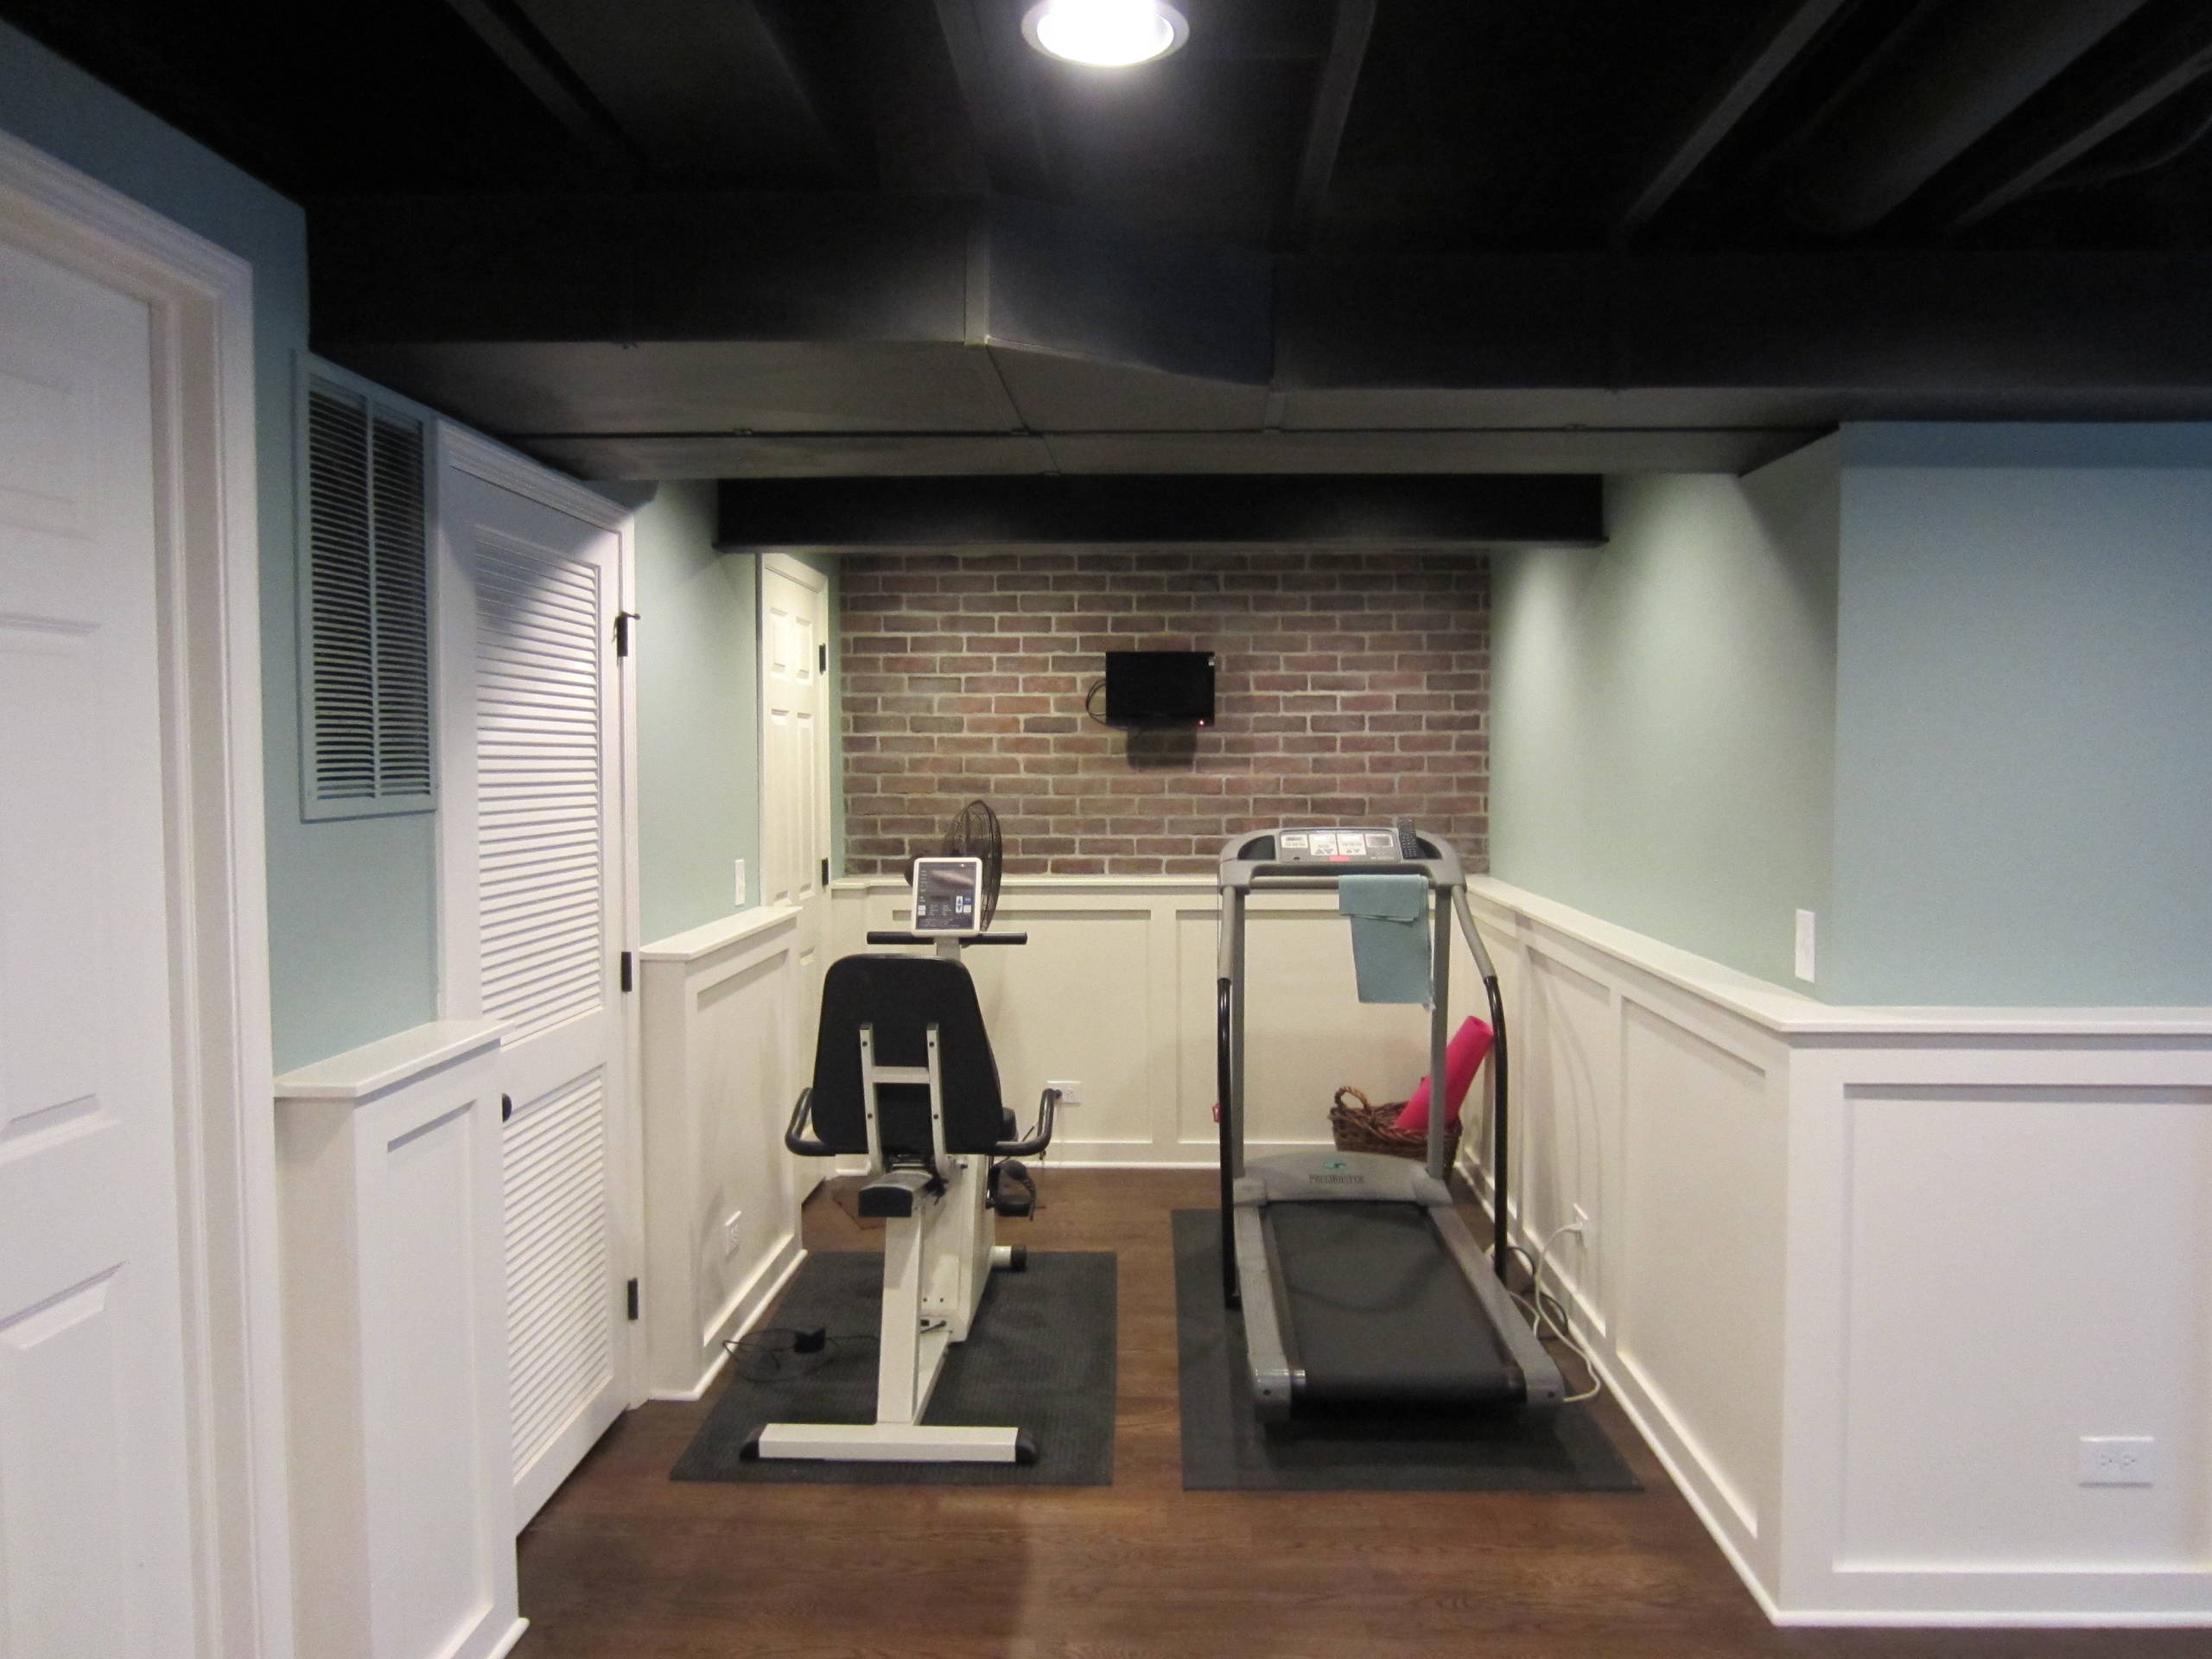 Ceilings Basement Home Gym Design Ideas gyms with low ceilings Best Home .....